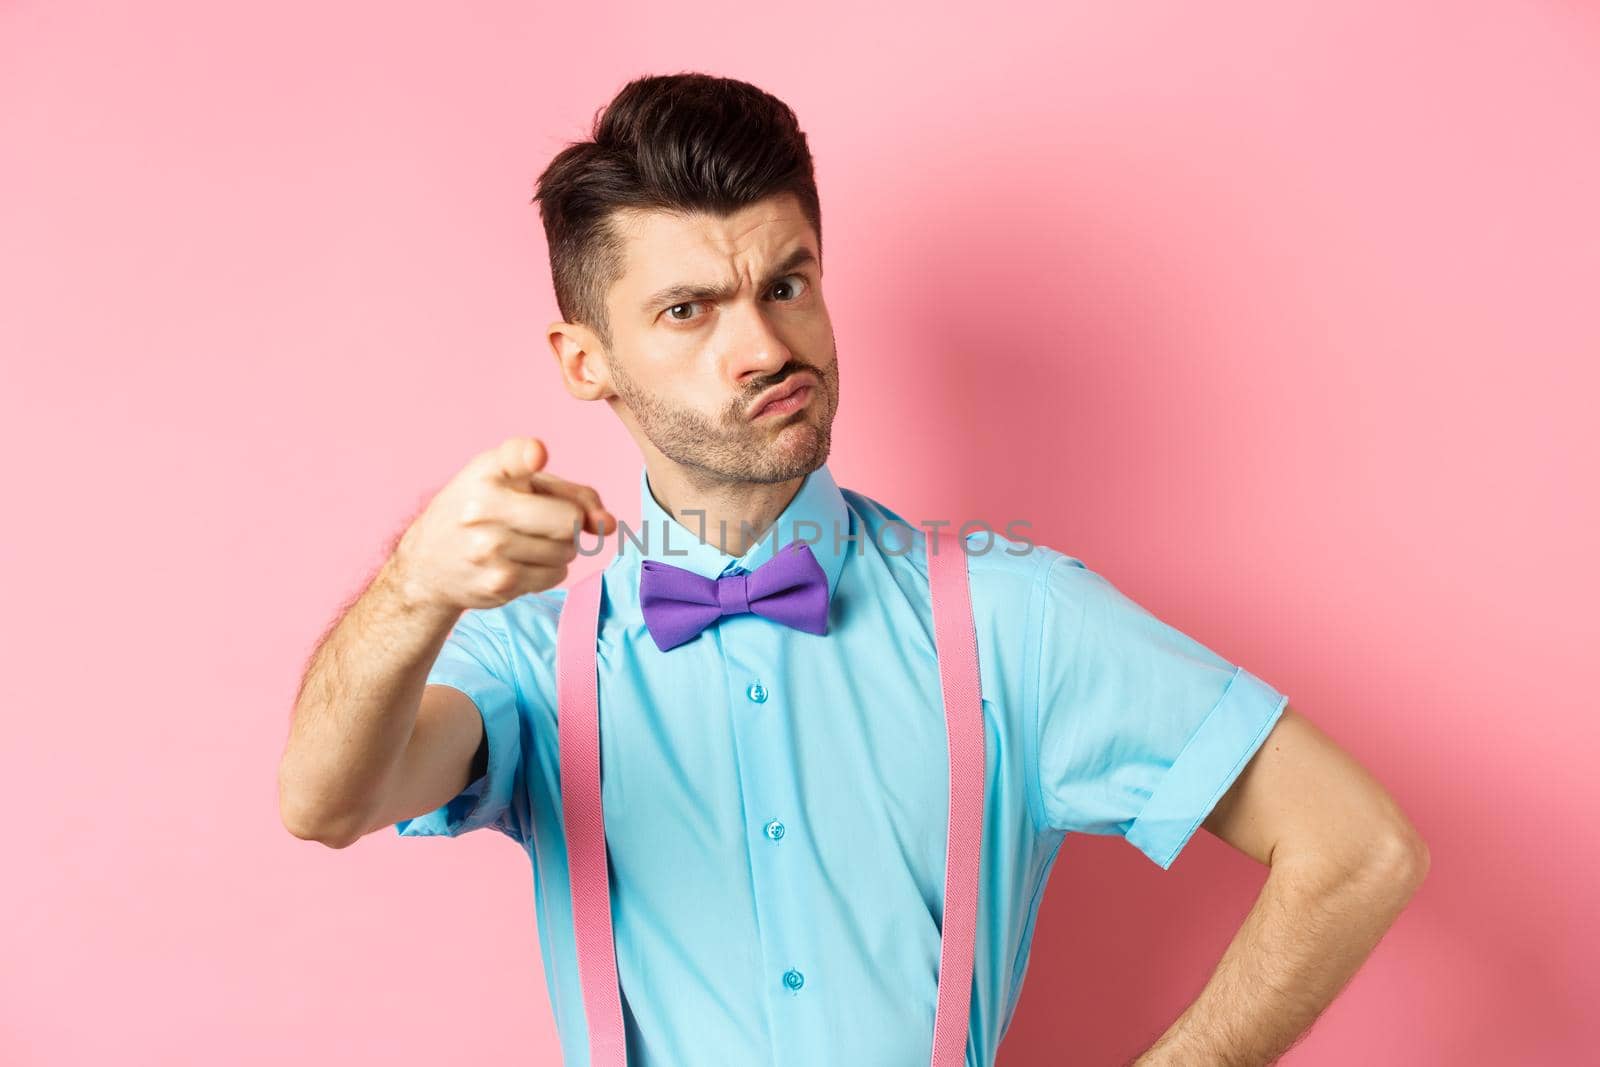 Grumpy guy in bow-tie and suspenders accusing you, its your fault gesture, pointing finger at camera with disappointed frowning face, pink background.